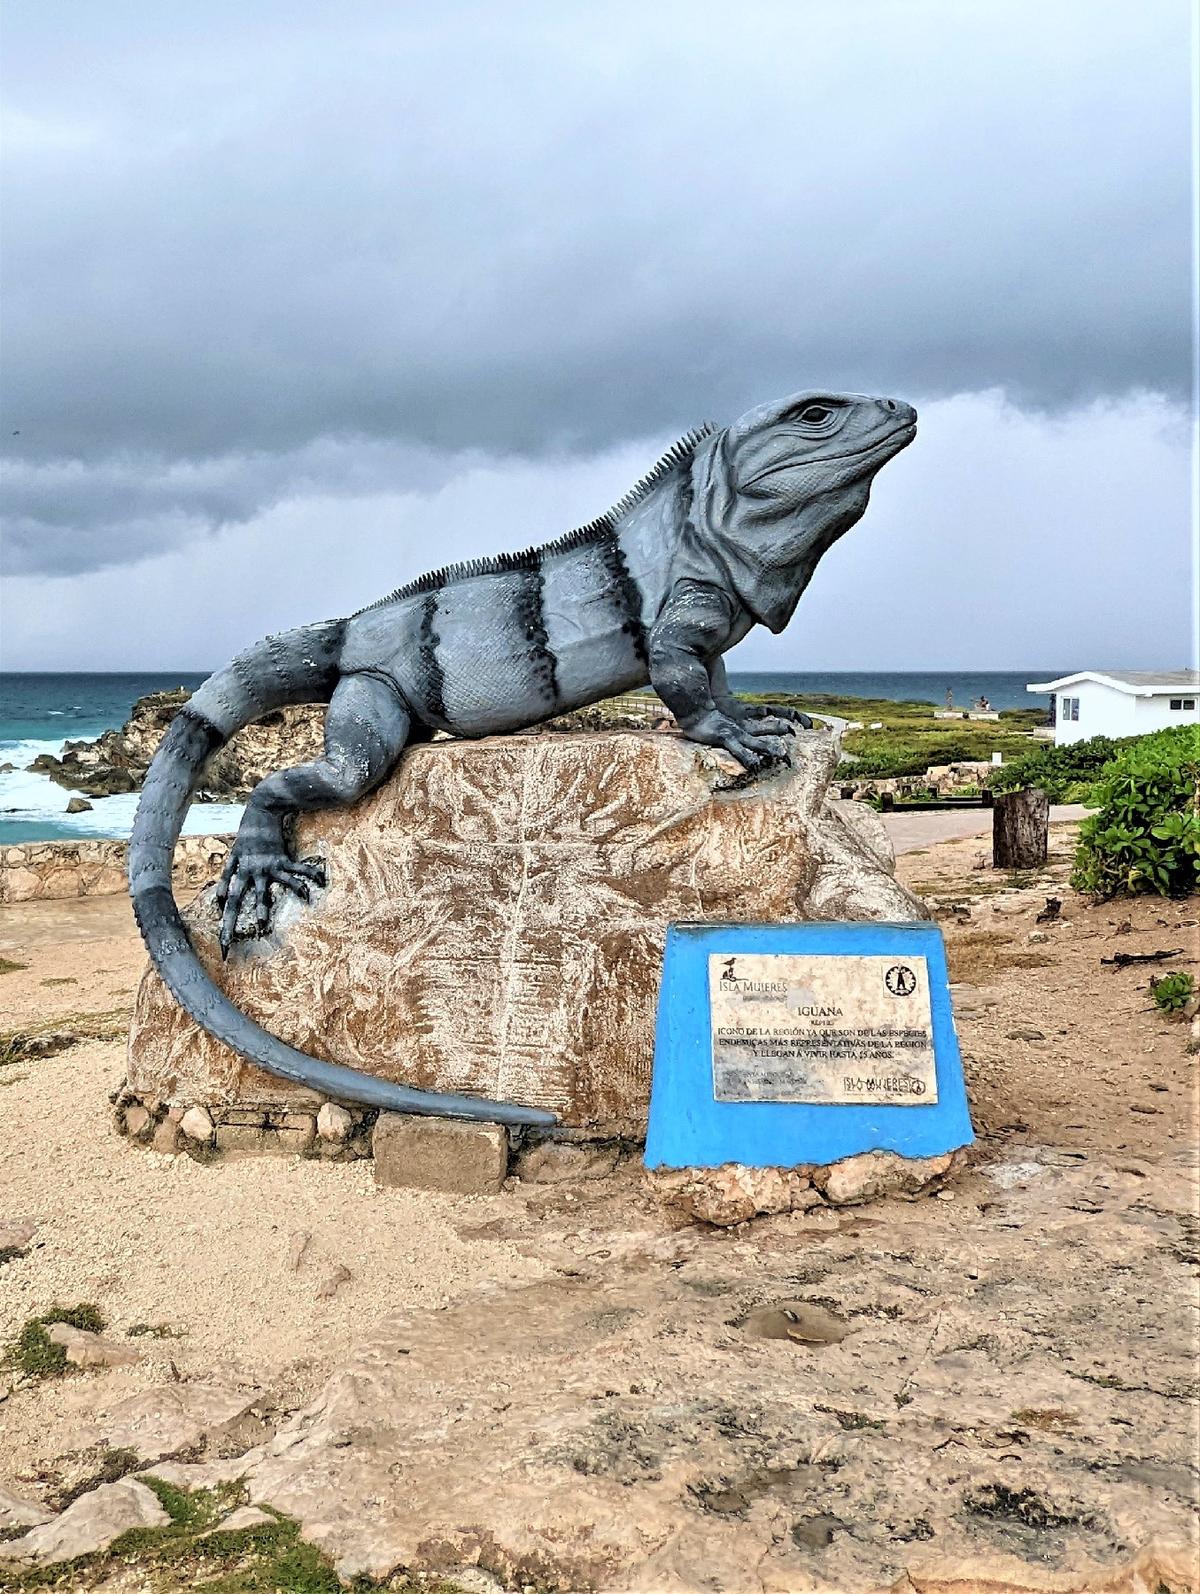 A monument on Mexico’s Isla Mujeres pays tribute to the indigenous iguana that thrives and roams freely here and throughout Central America. (Photo courtesy of Athena Lucero)